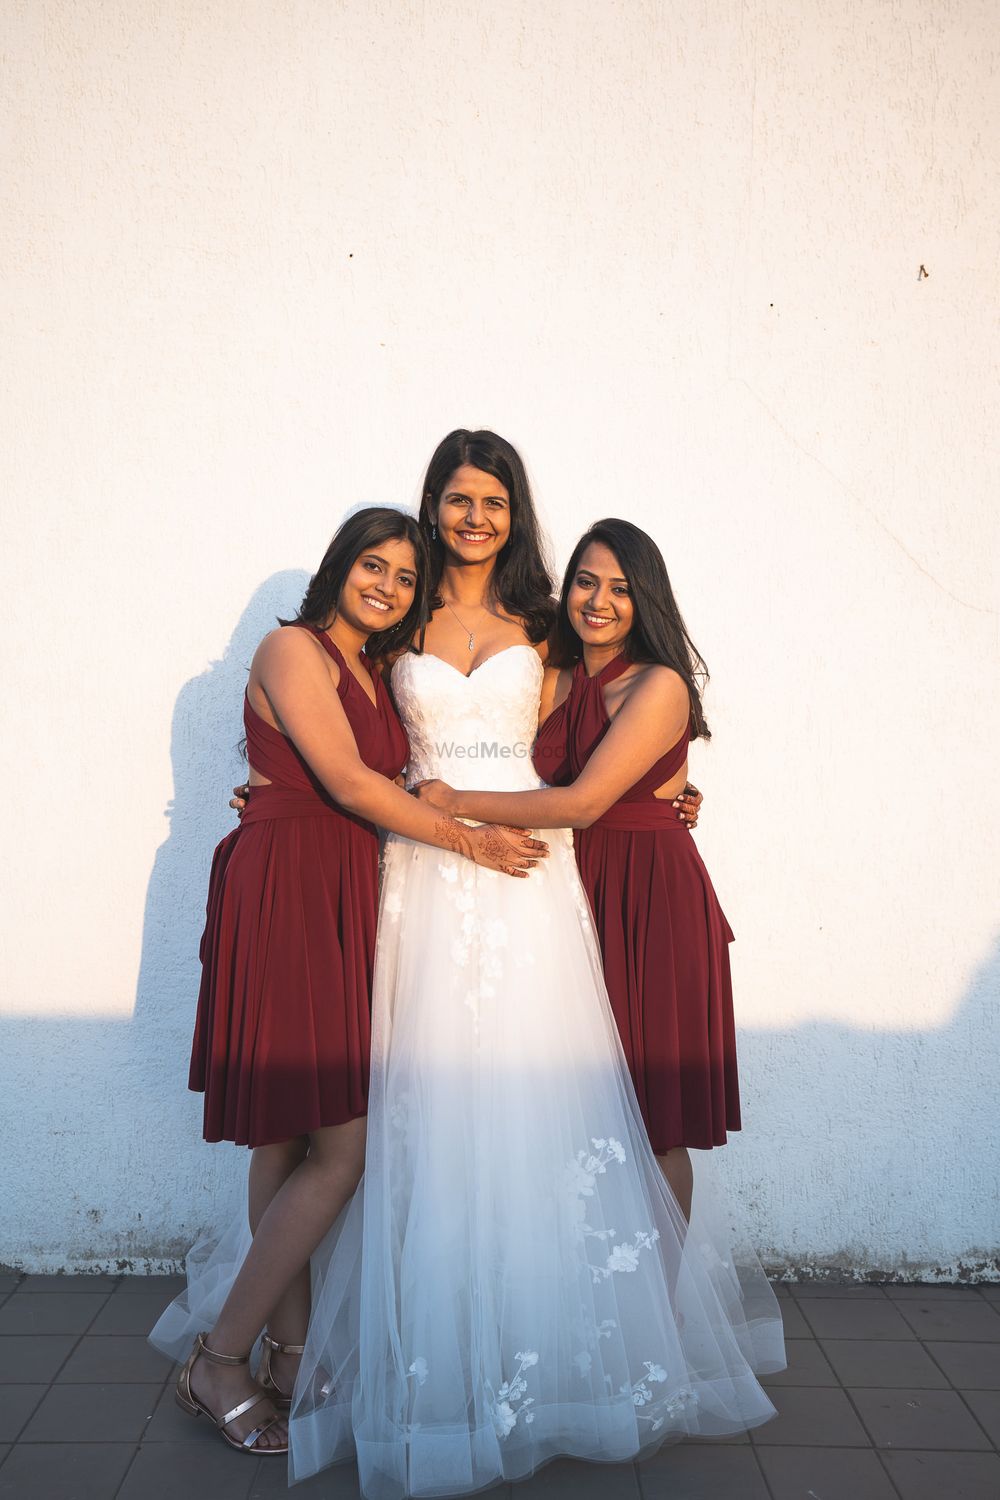 Photo of A bride with her bridesmaid in matching bridesmaid dresses.